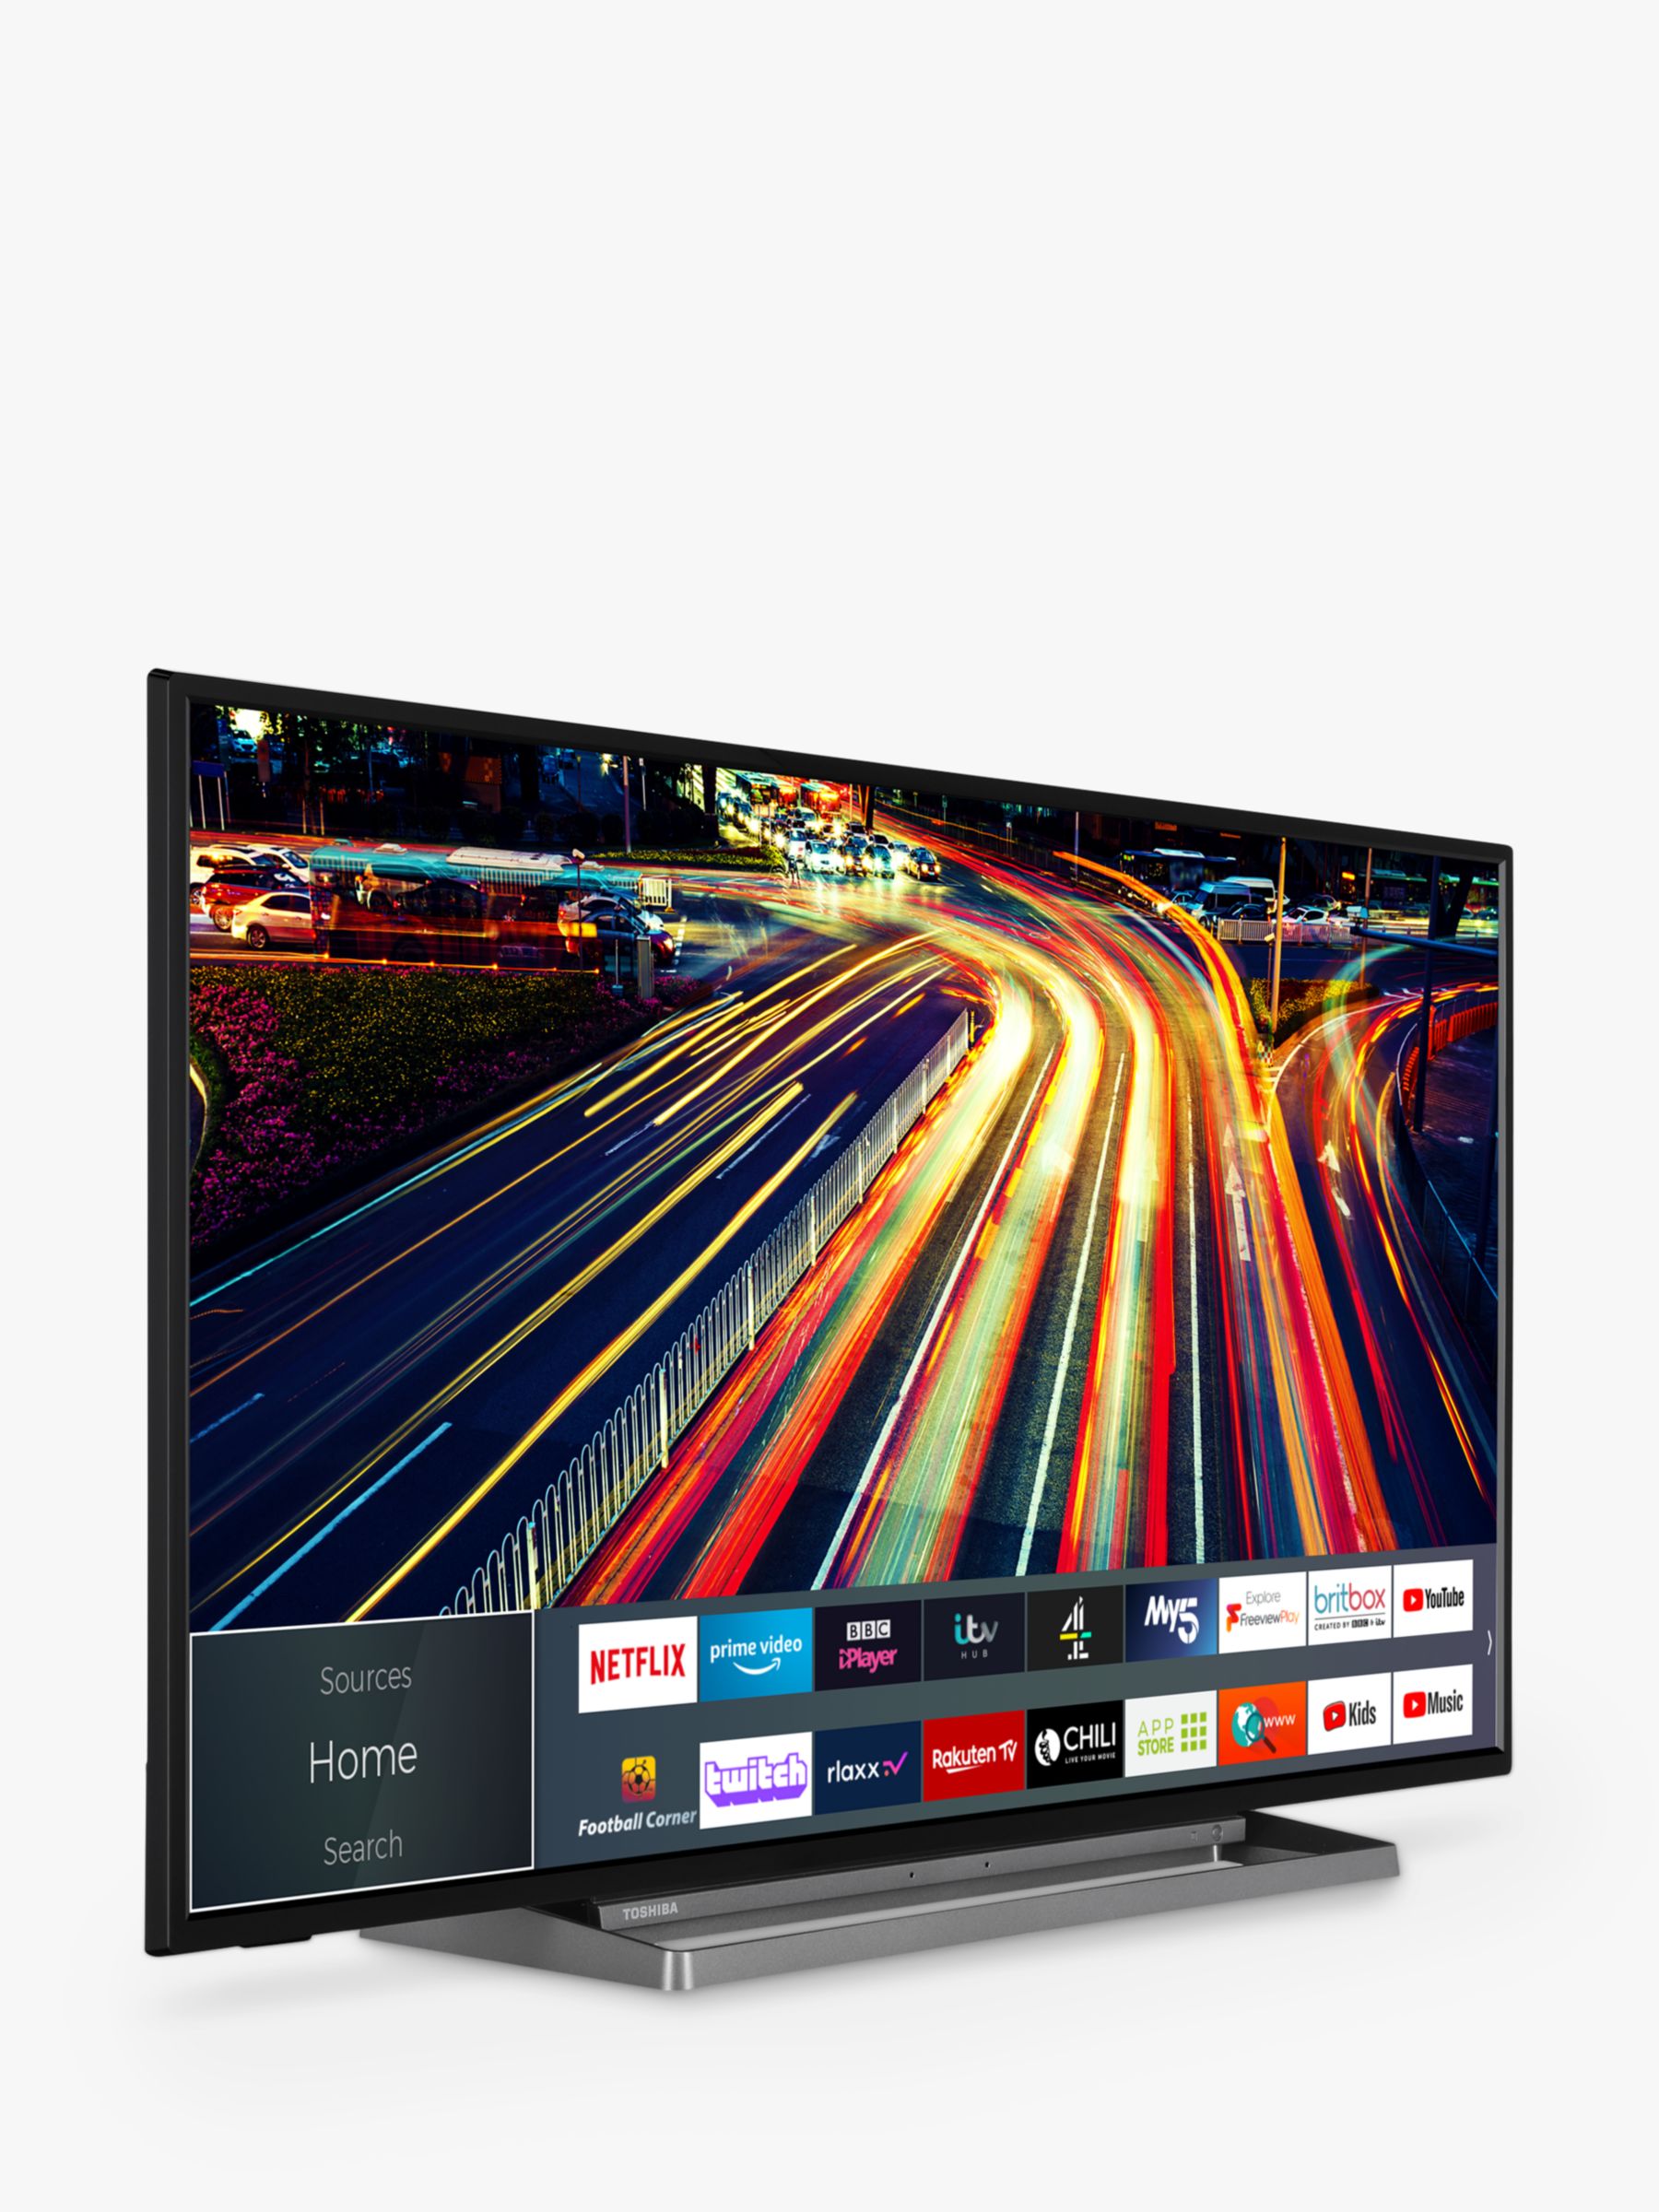 Toshiba 43LK3C63DB (2022) LED HDR Full HD 1080p Smart TV, 43 inch with  Freeview Play, Black